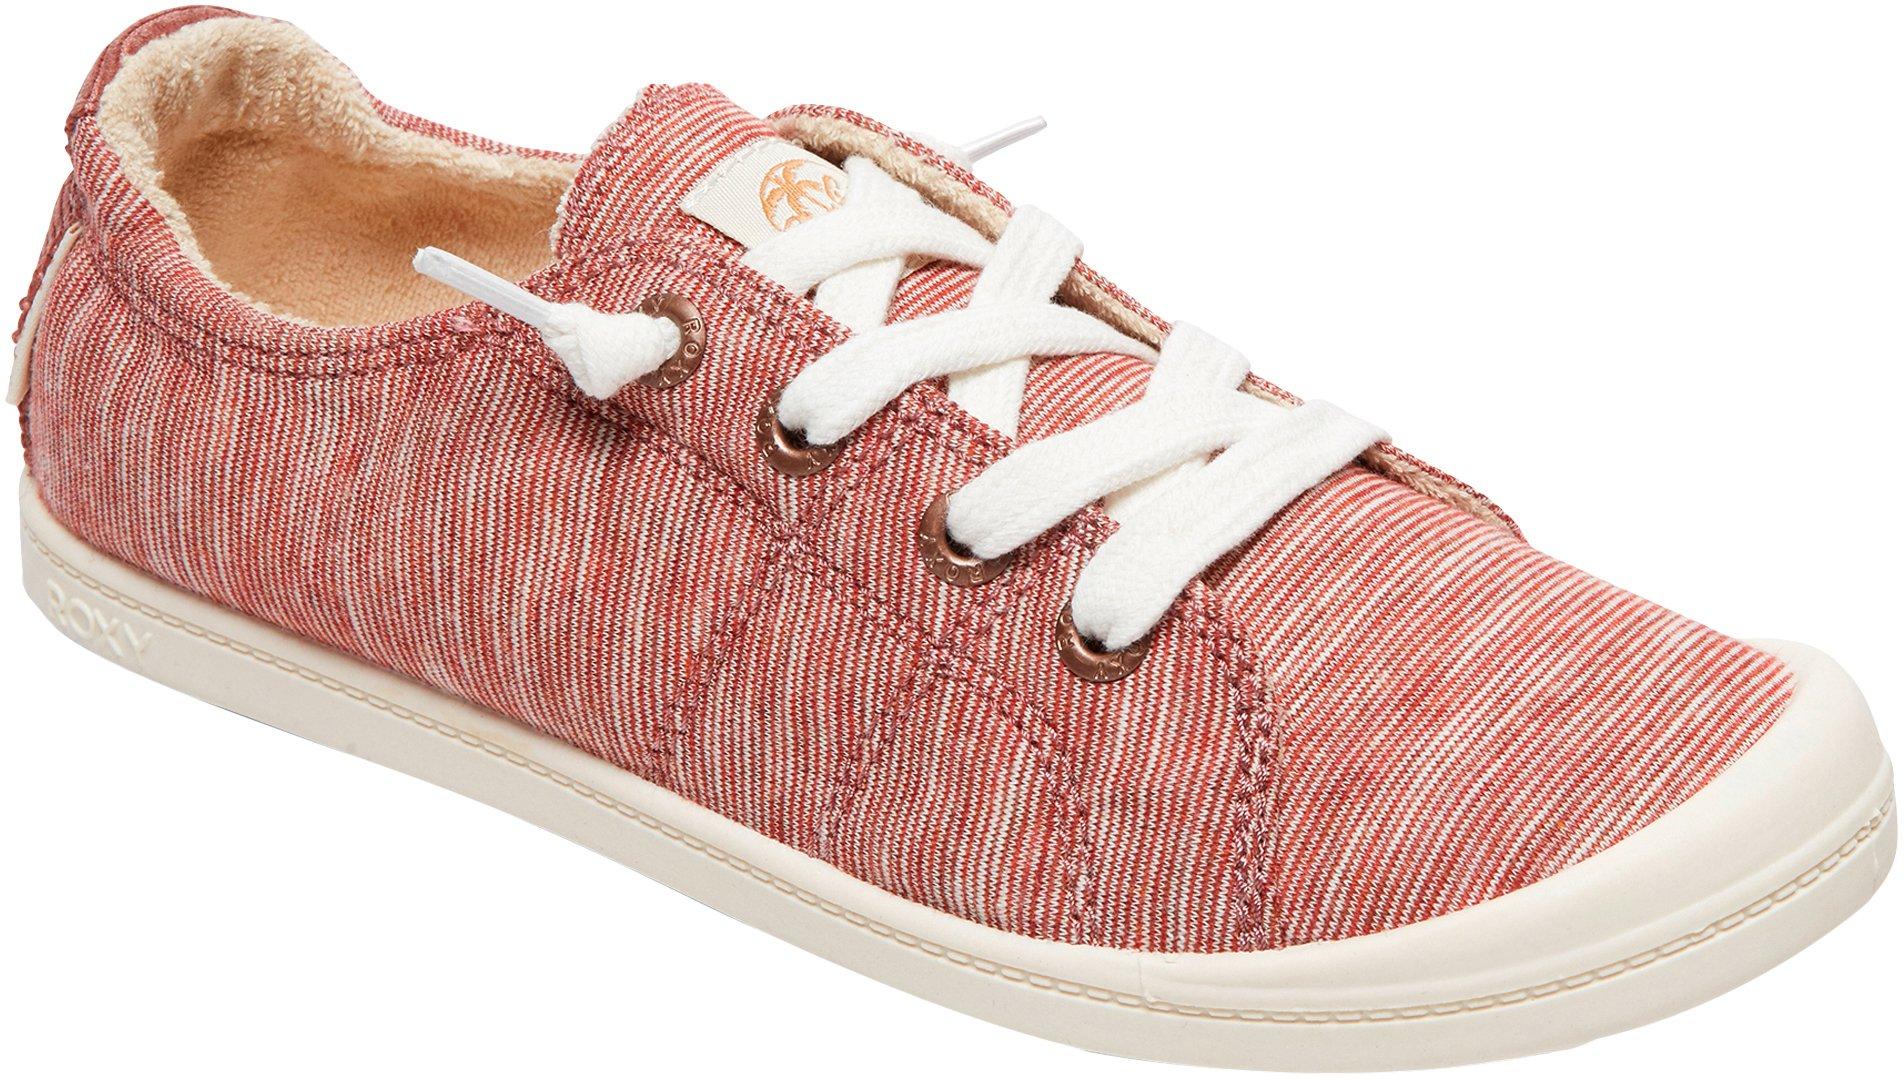 roxy slip on canvas shoes